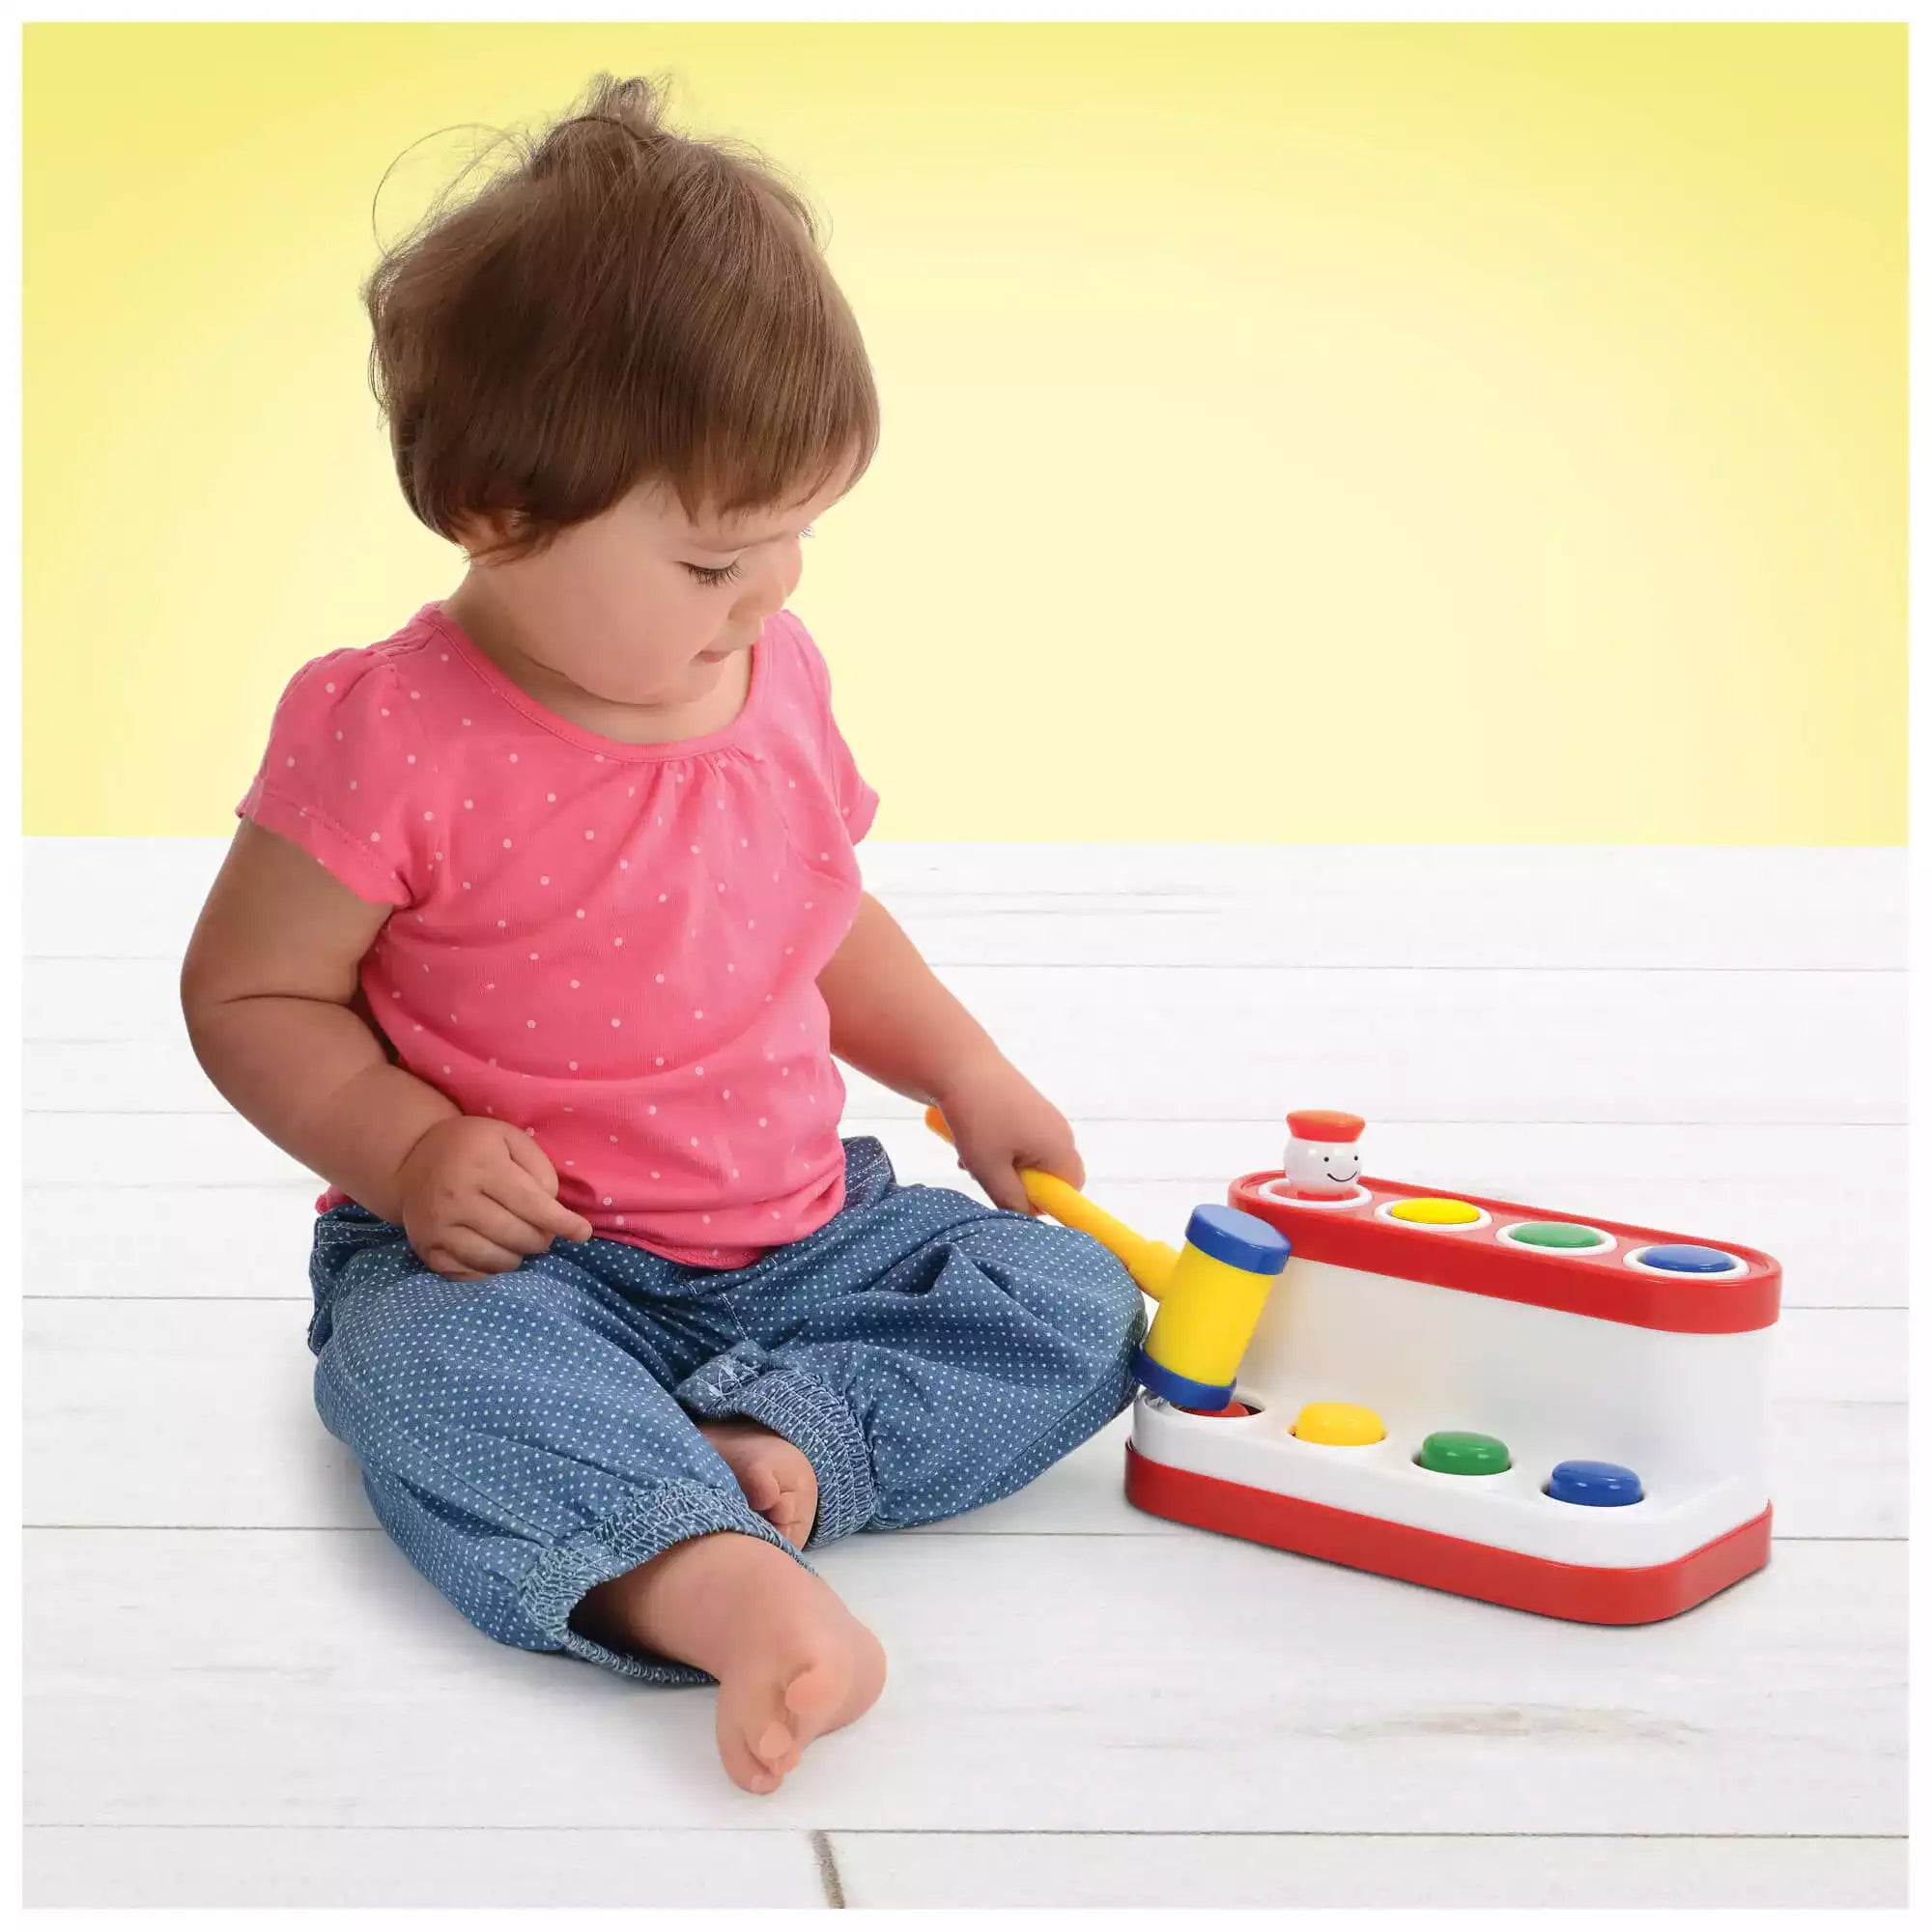 pop up toys for toddlers - pop up toy - early learning toys at the toy room